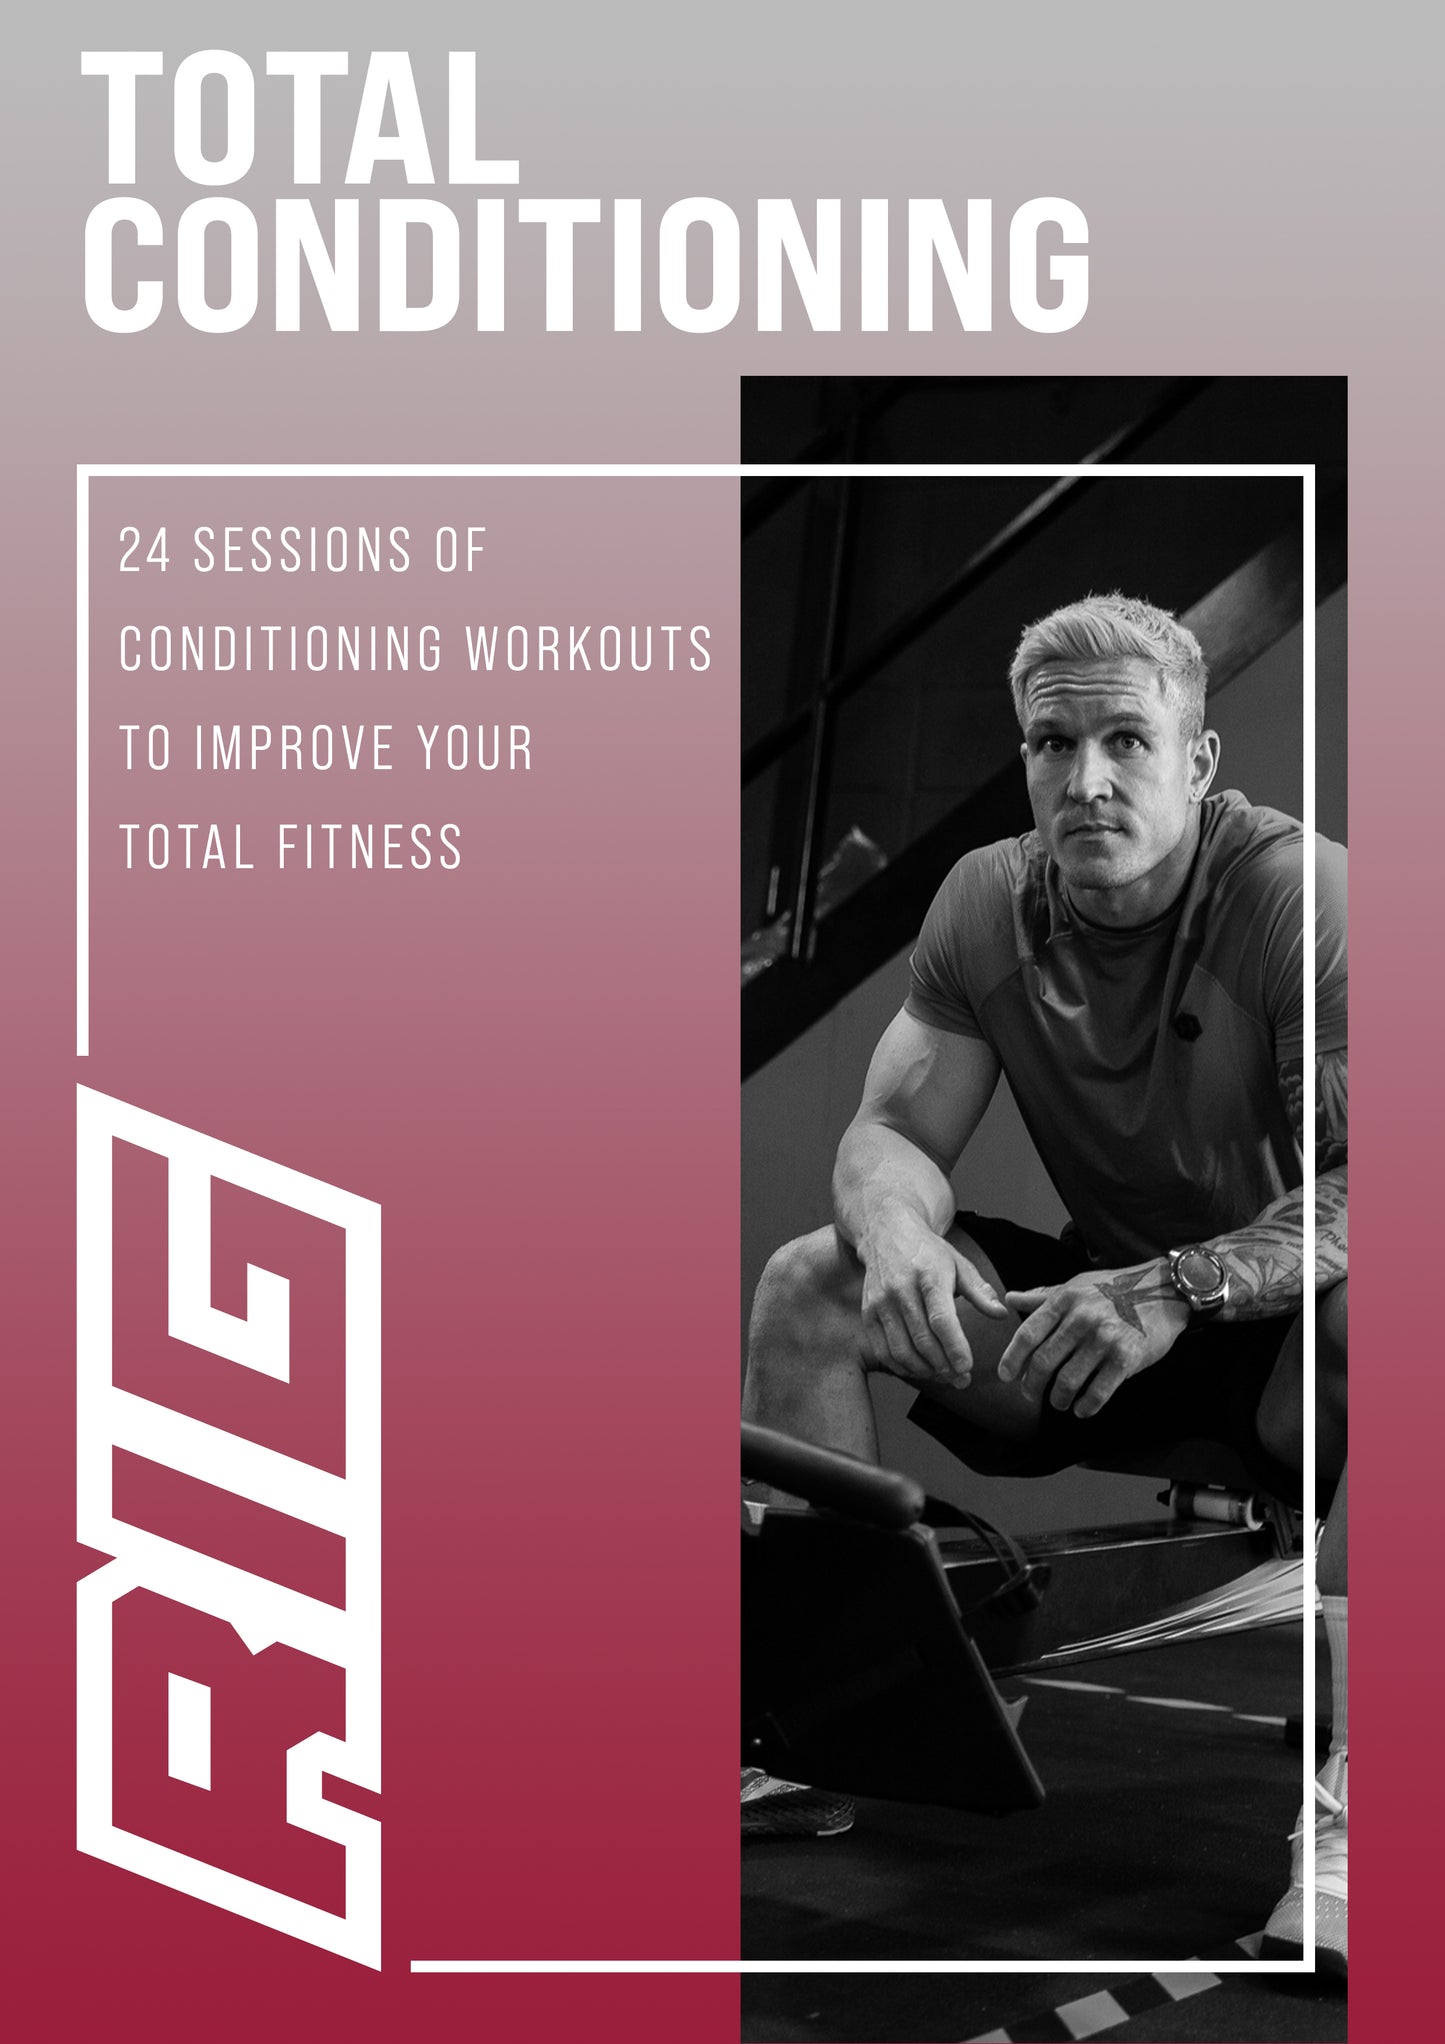 Total Conditioning - Rig Training Programs